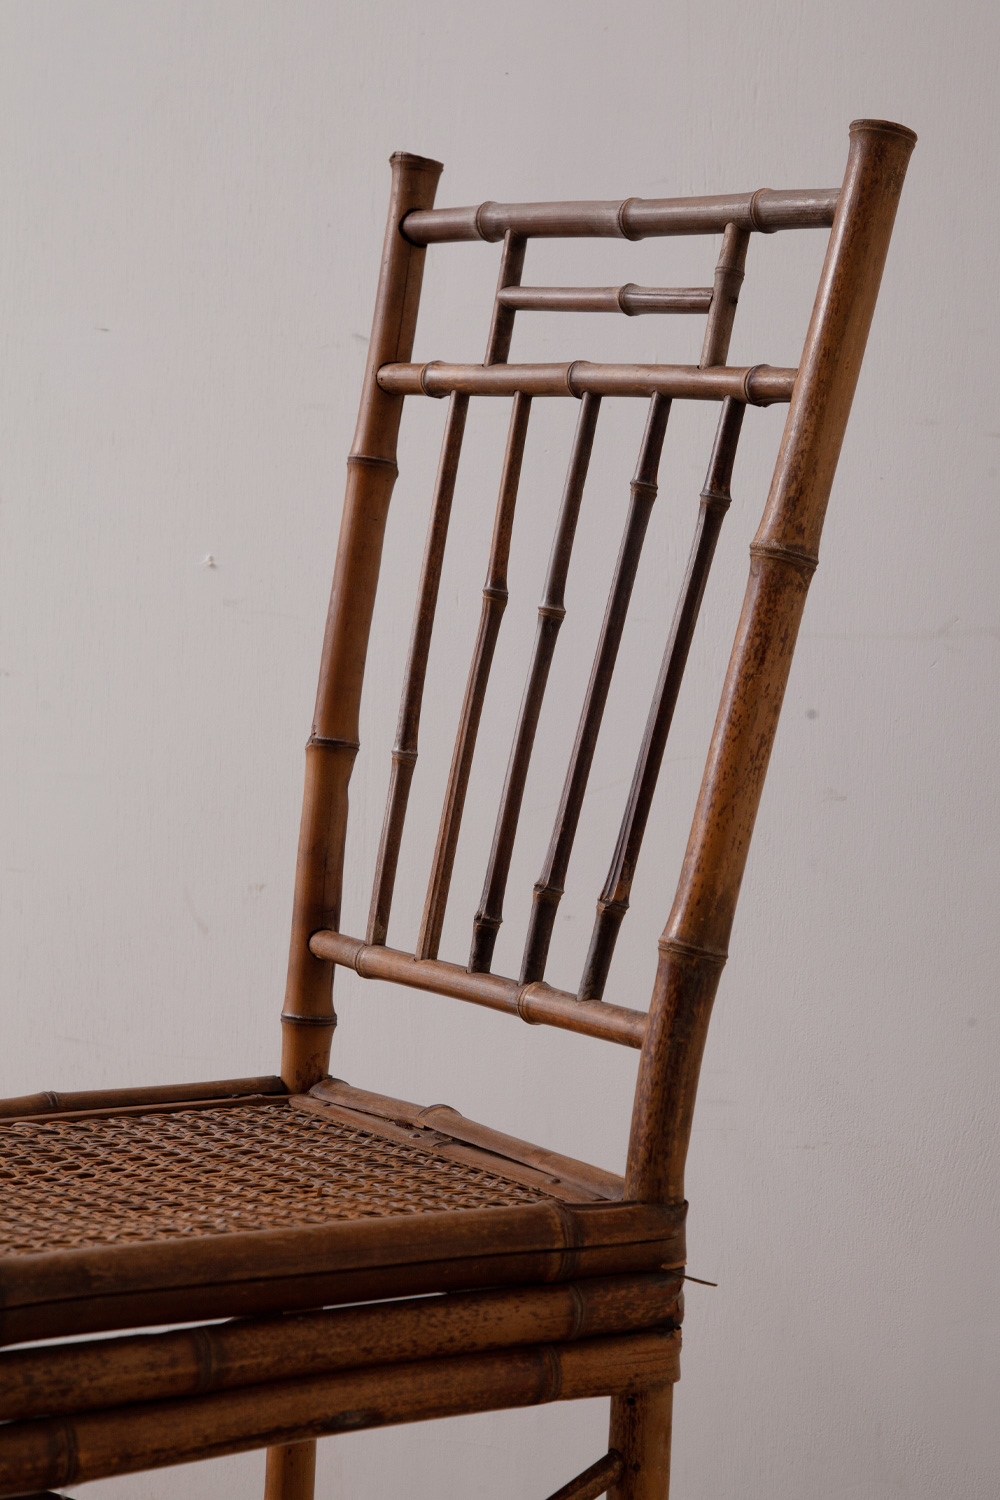 Antique Chair in Bamboo